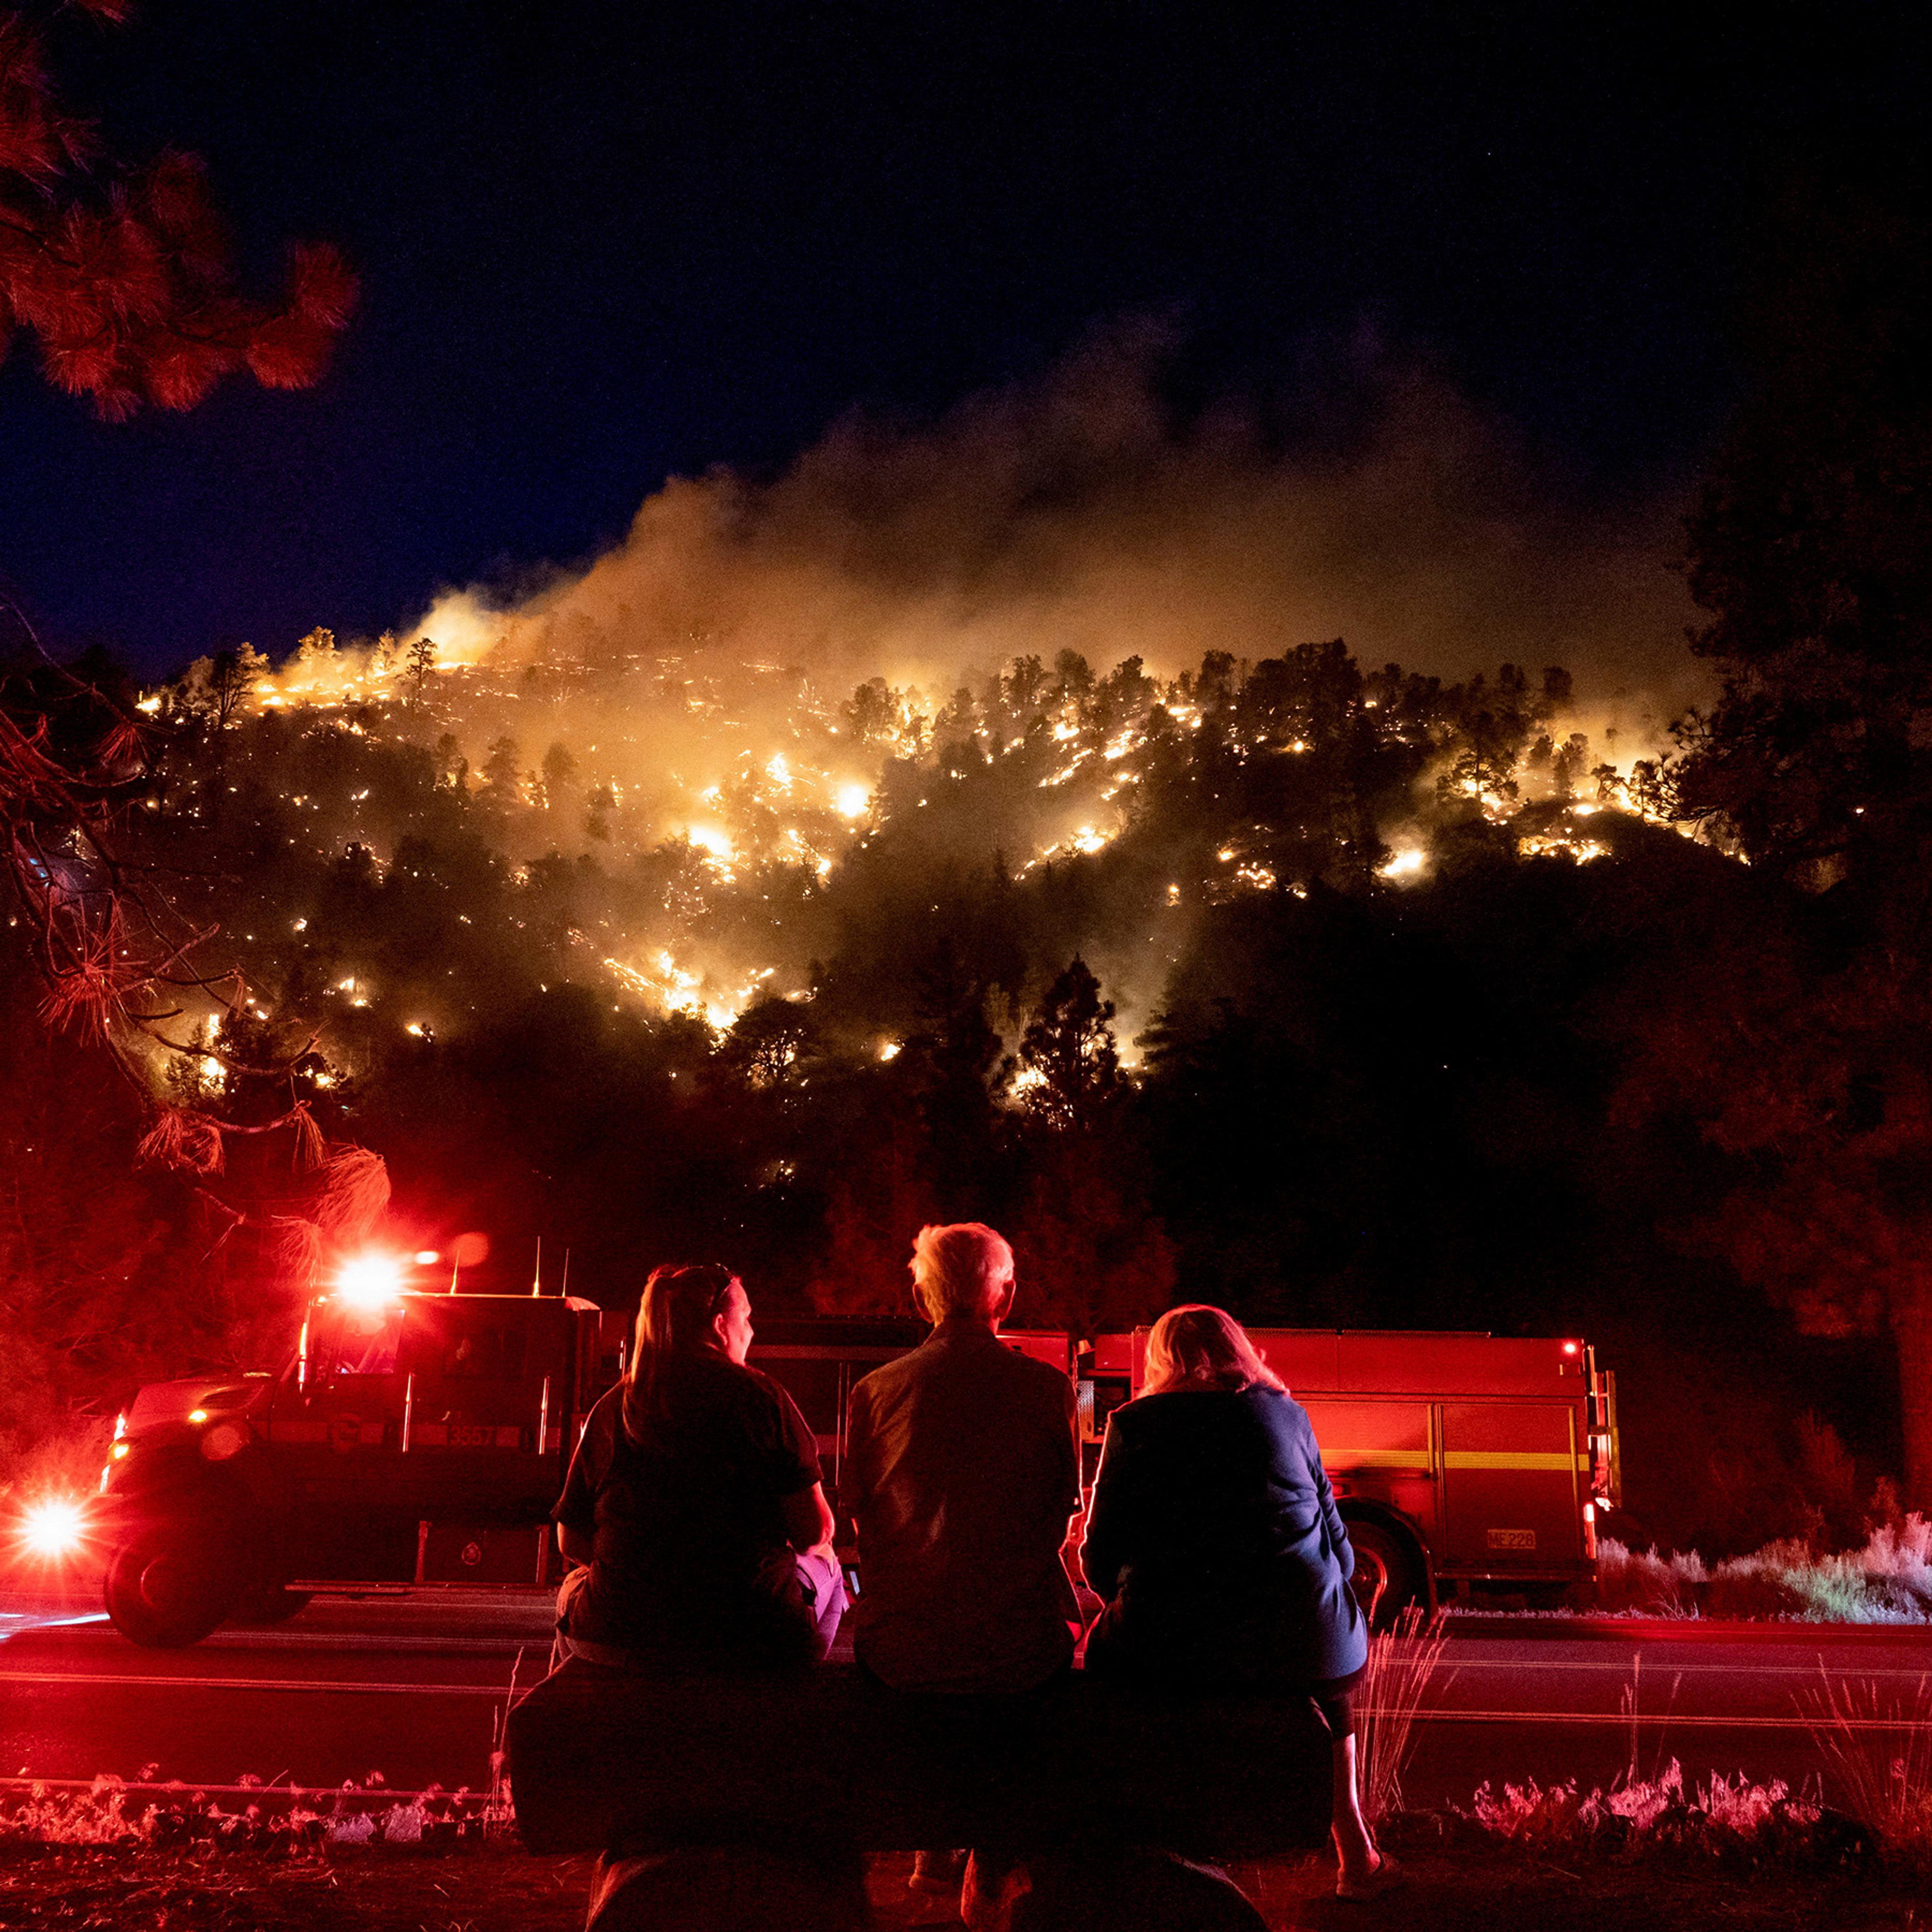 Three people sit on a bench facing a forest fire on a hill at night, with a fire truck nearby. The flames illuminate the trees, creating a dramatic and intense scene.